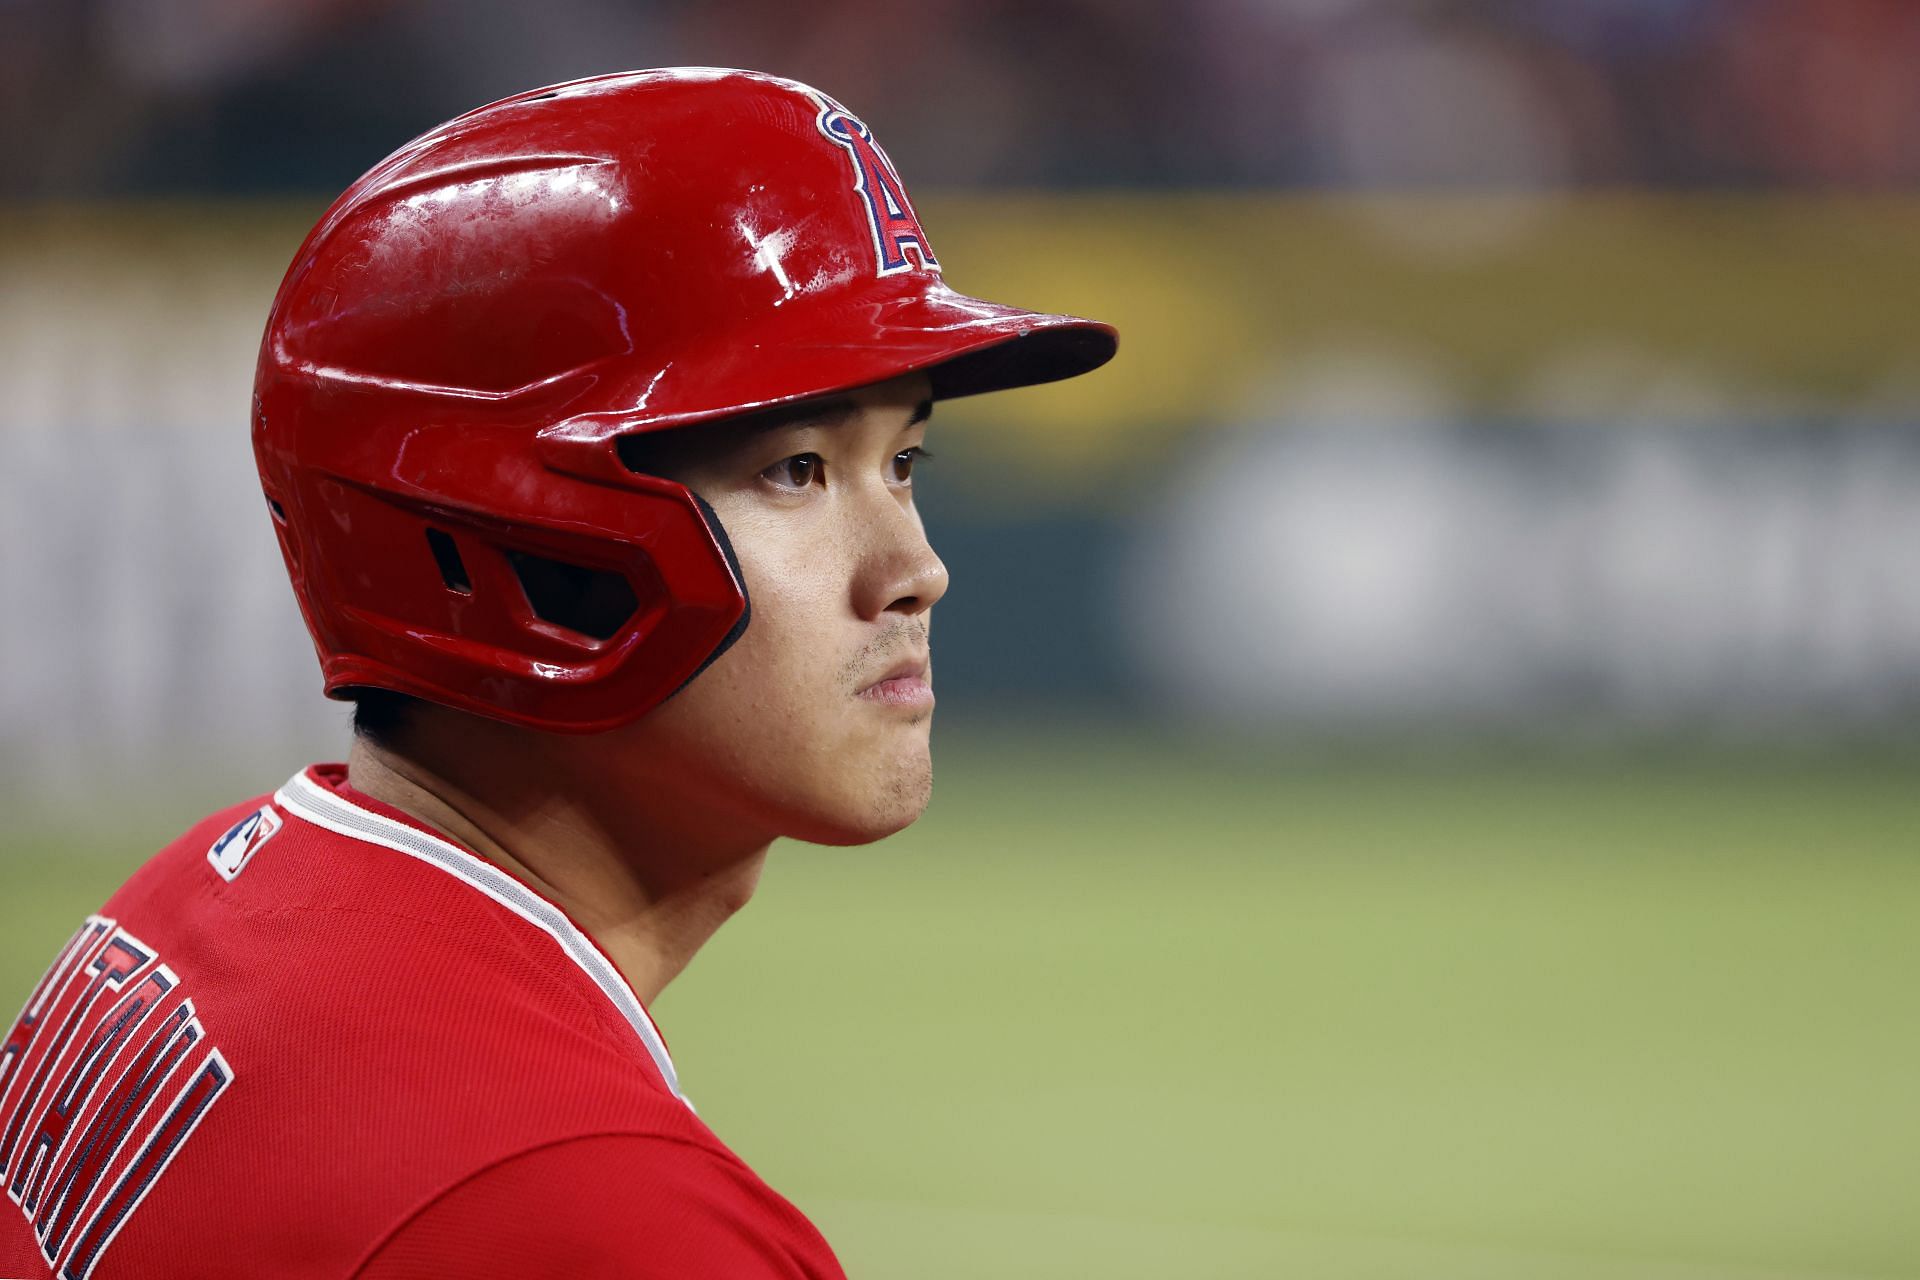 Los Angeles Angels superstar Shohei Ohtani bought a Tesla for his first car.